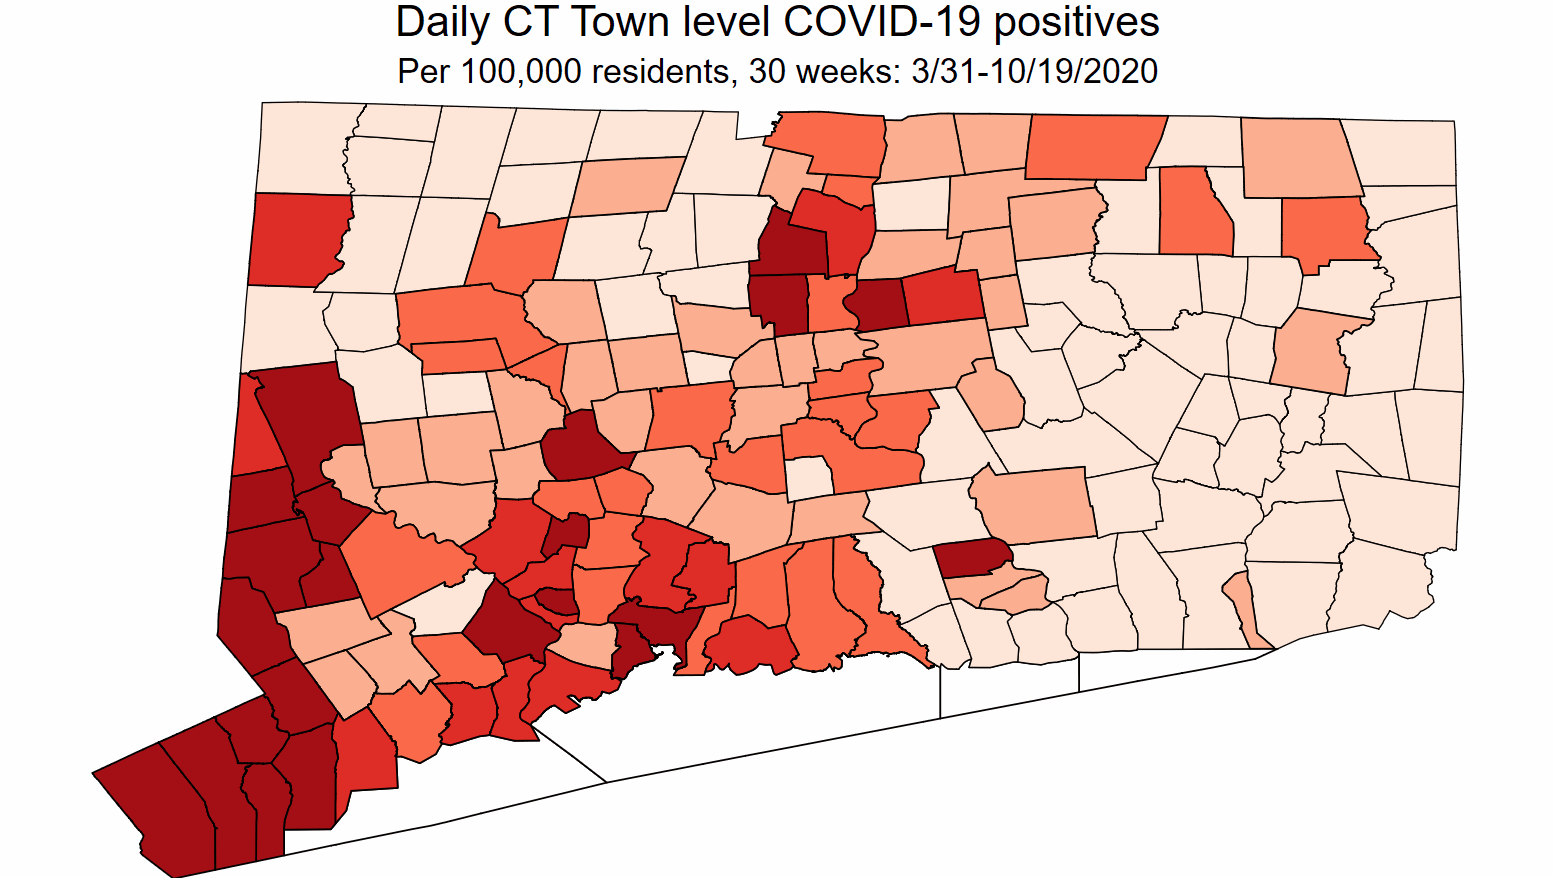 Daily CT Town level COVID-19 positives